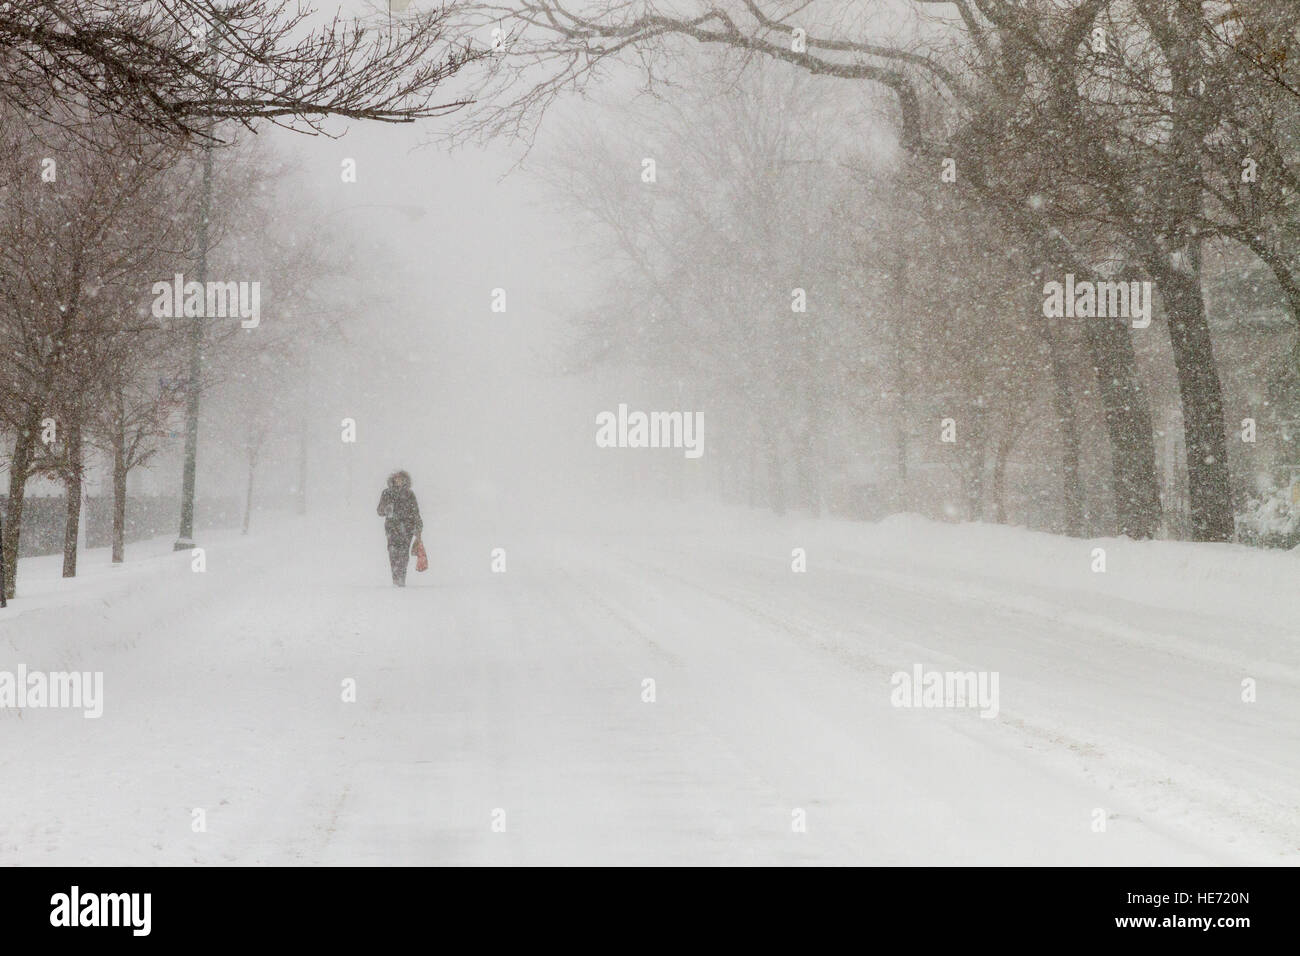 Blizzard in Chicago with empty street and single person walking during snow storm Stock Photo